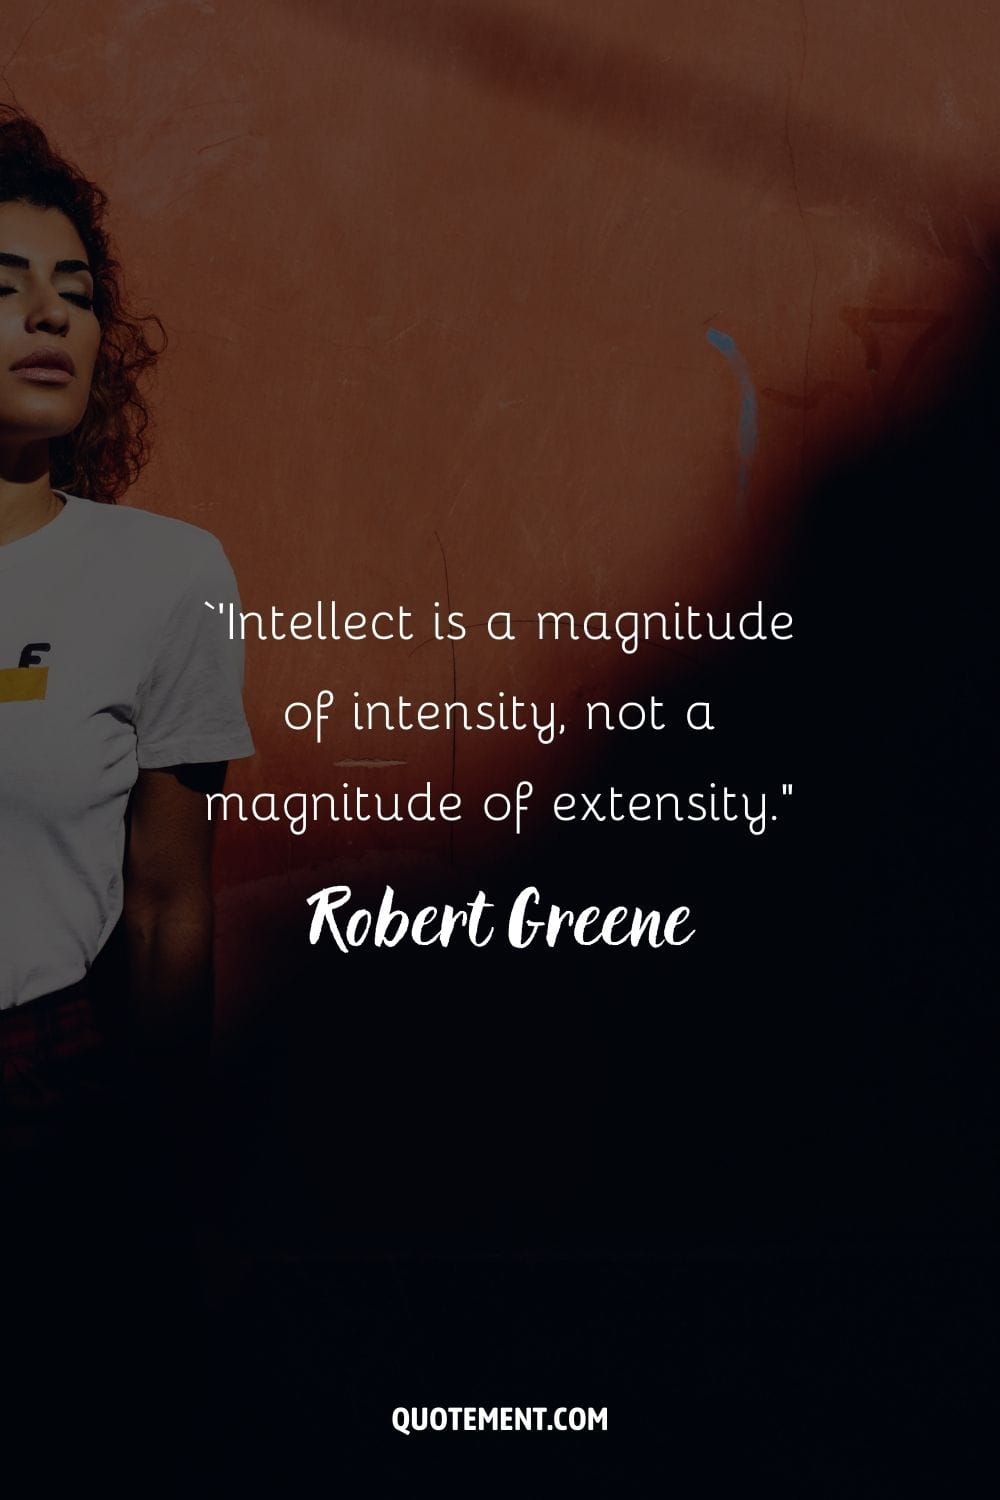 ‘’Intellect is a magnitude of intensity, not a magnitude of extensity.” ― Robert Greene, The 48 Laws of Power